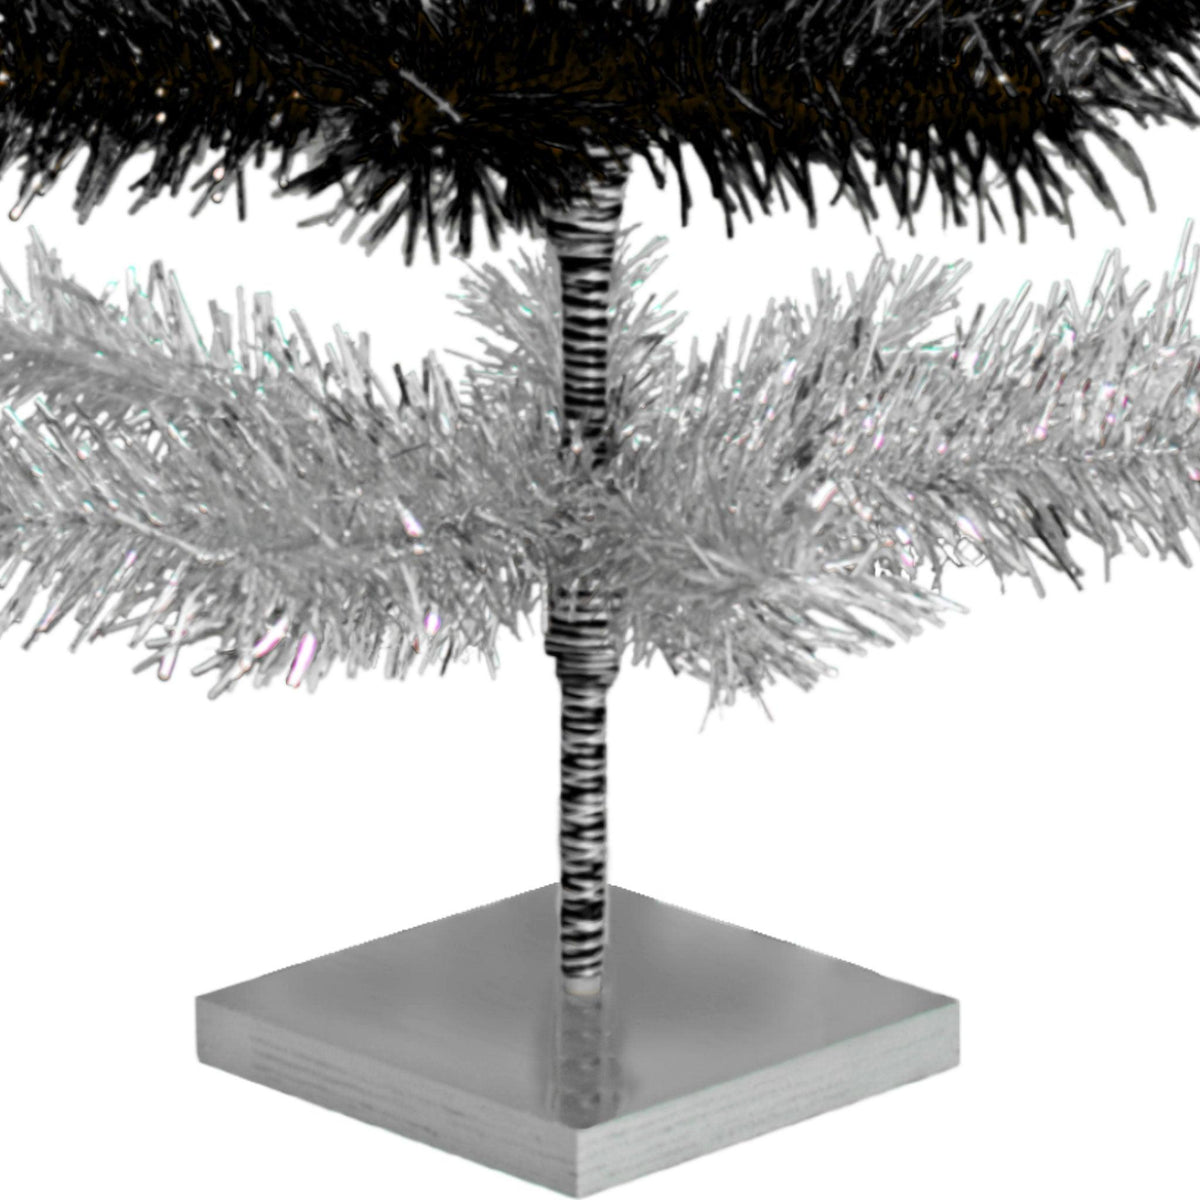 Black & Silver Layered Tinsel Christmas Trees!    Decorate for the holidays with a Shiny Black and Metallic Silver retro-style Christmas Tree.  On sale now at leedisplay.com